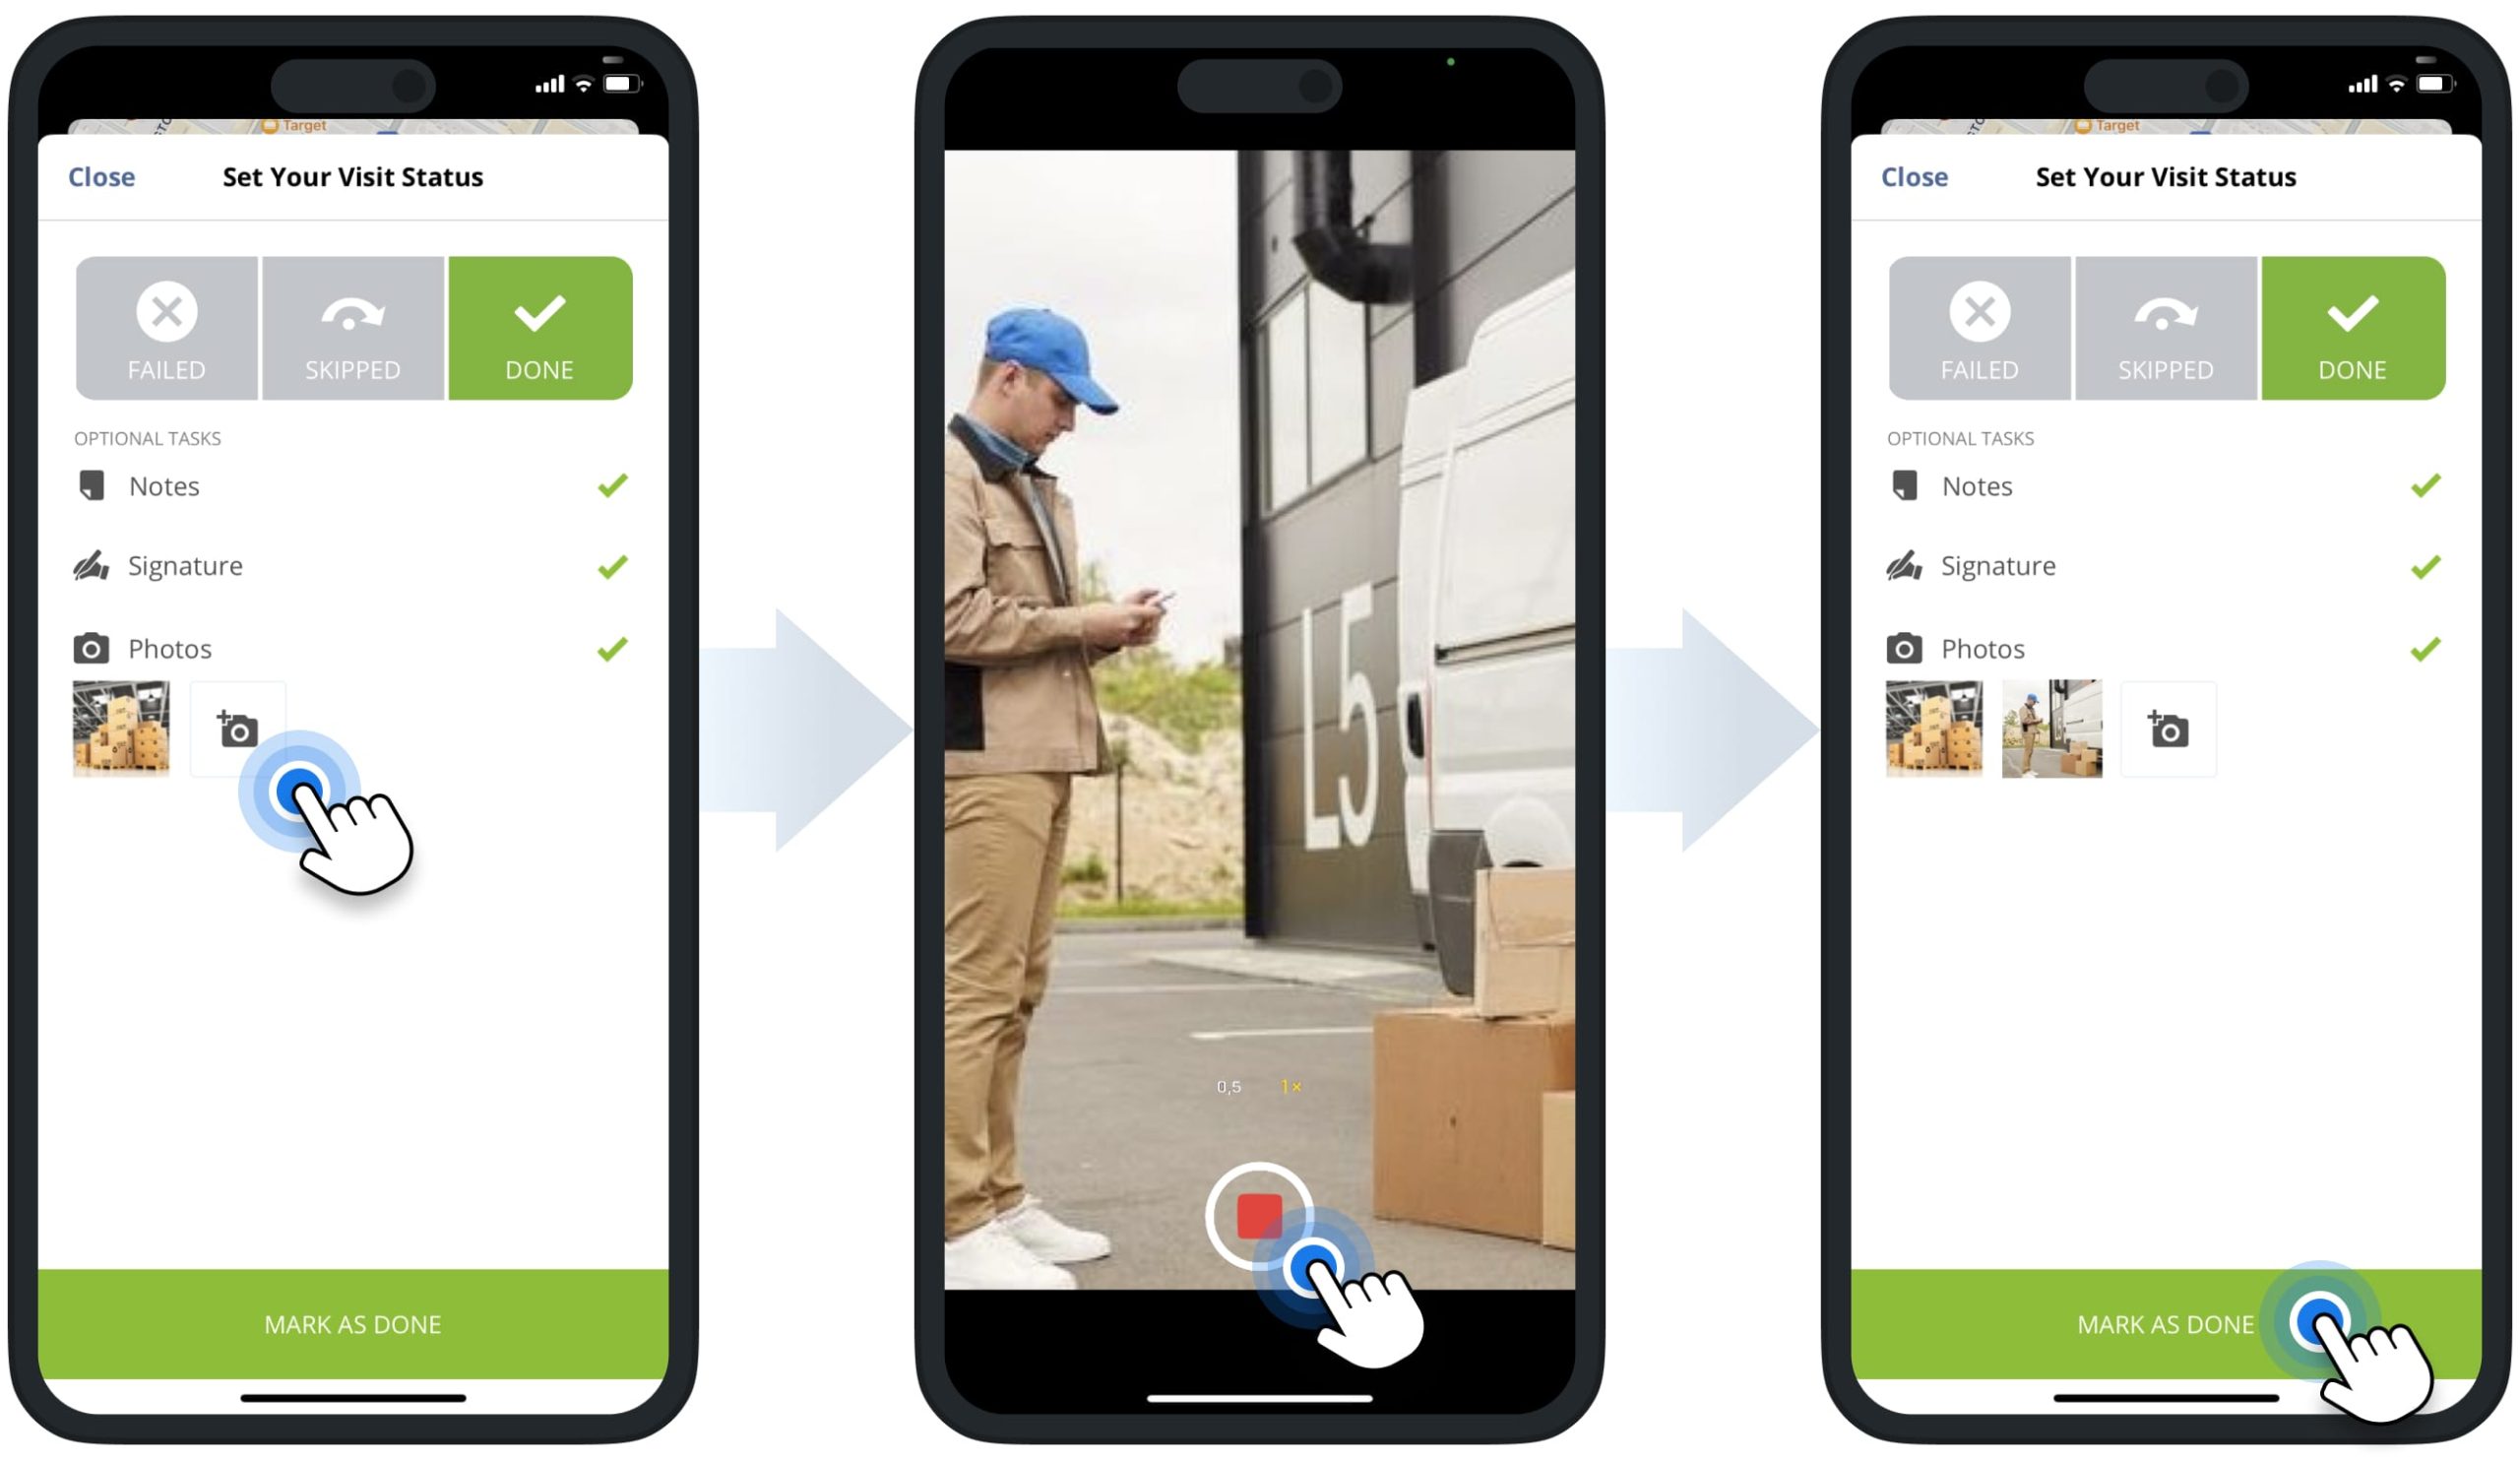 Attach video recordings as proof of visit, delivery, or service to route stops using Route4Me's multi-address route planning app for last-mile drivers.